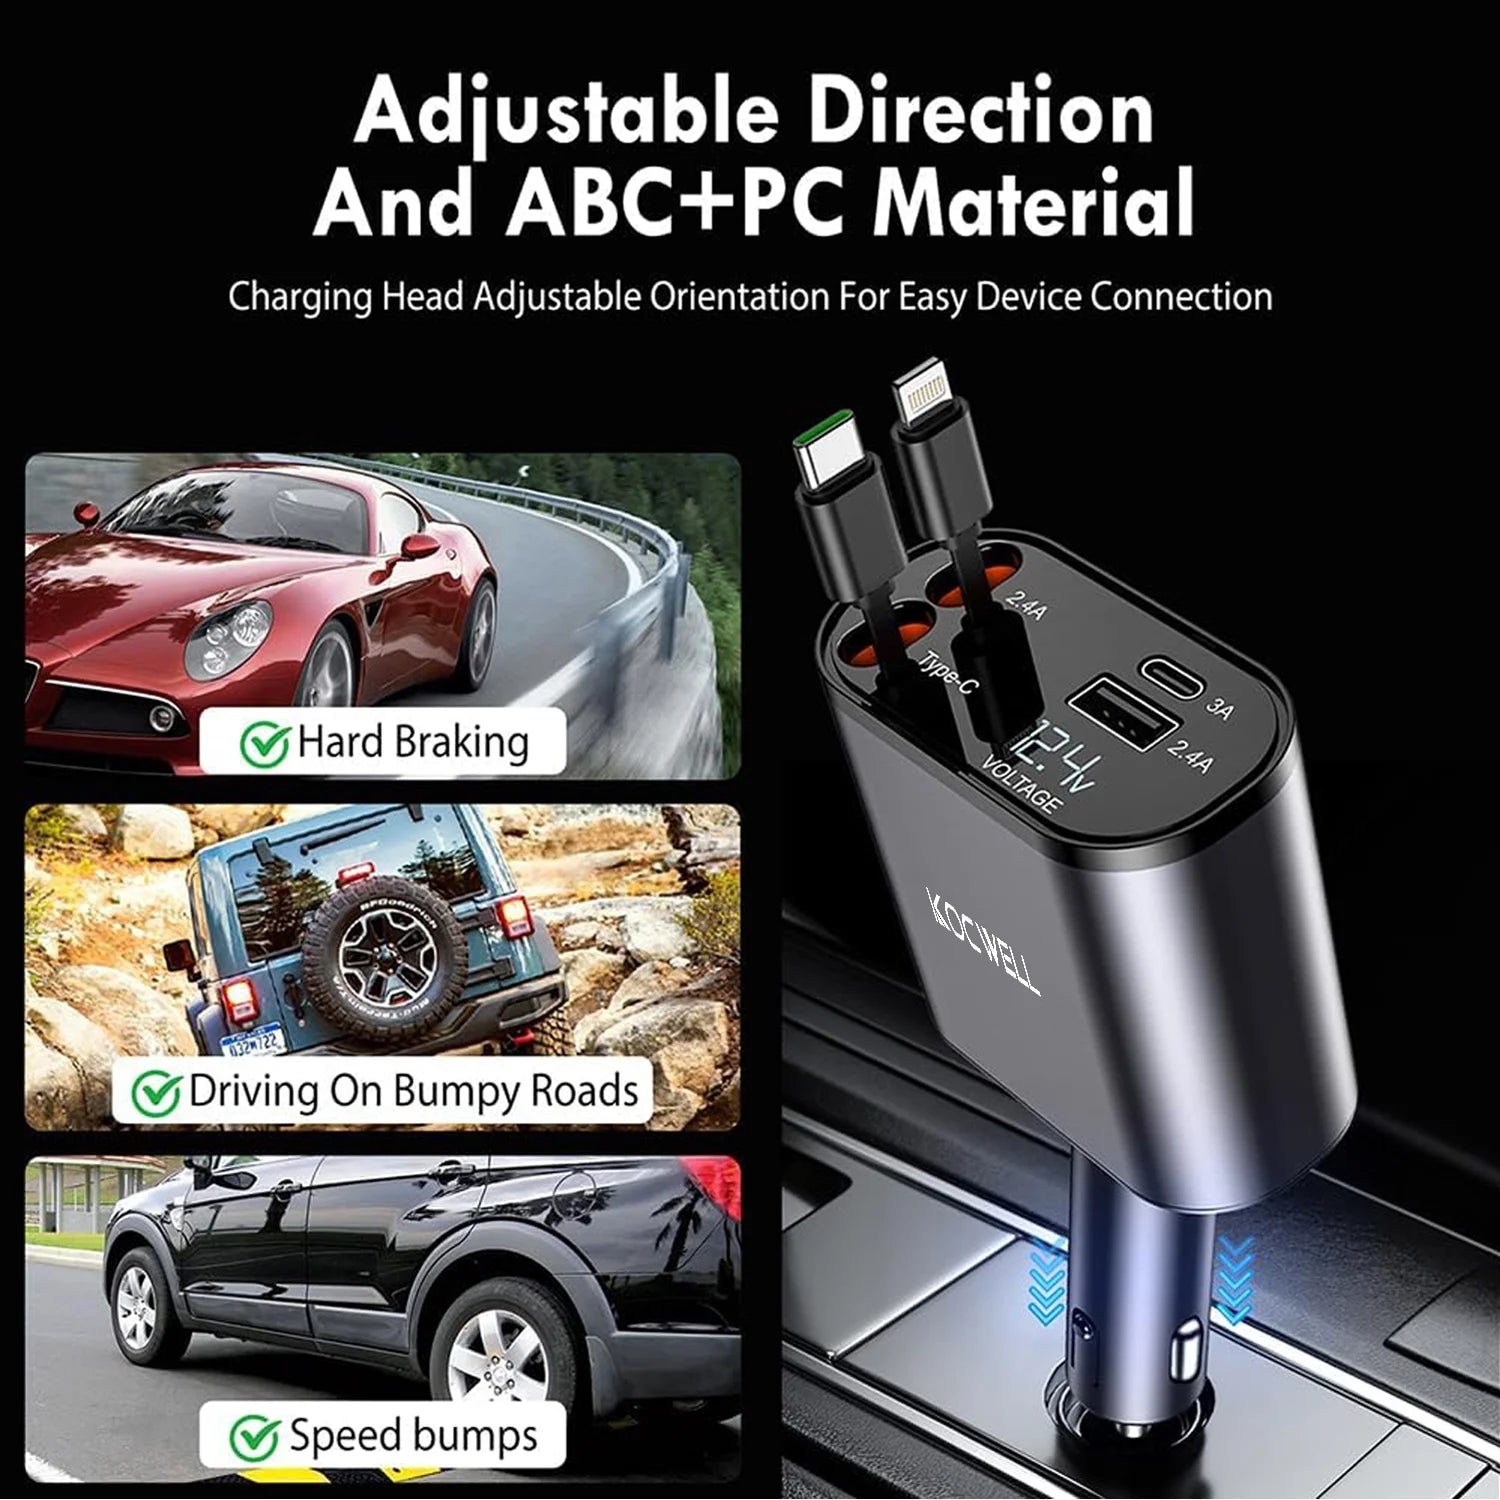 Retractable Car Charger, 100W 4 in 1 Super Fast Charge Car Phone Charger,Retractable Cables (31.5 Inch) and 2 USB Ports Car Charger Adapter for Iphone 15/14/13/12 Pro Max Xr,Ipad,Samsung,Pixel